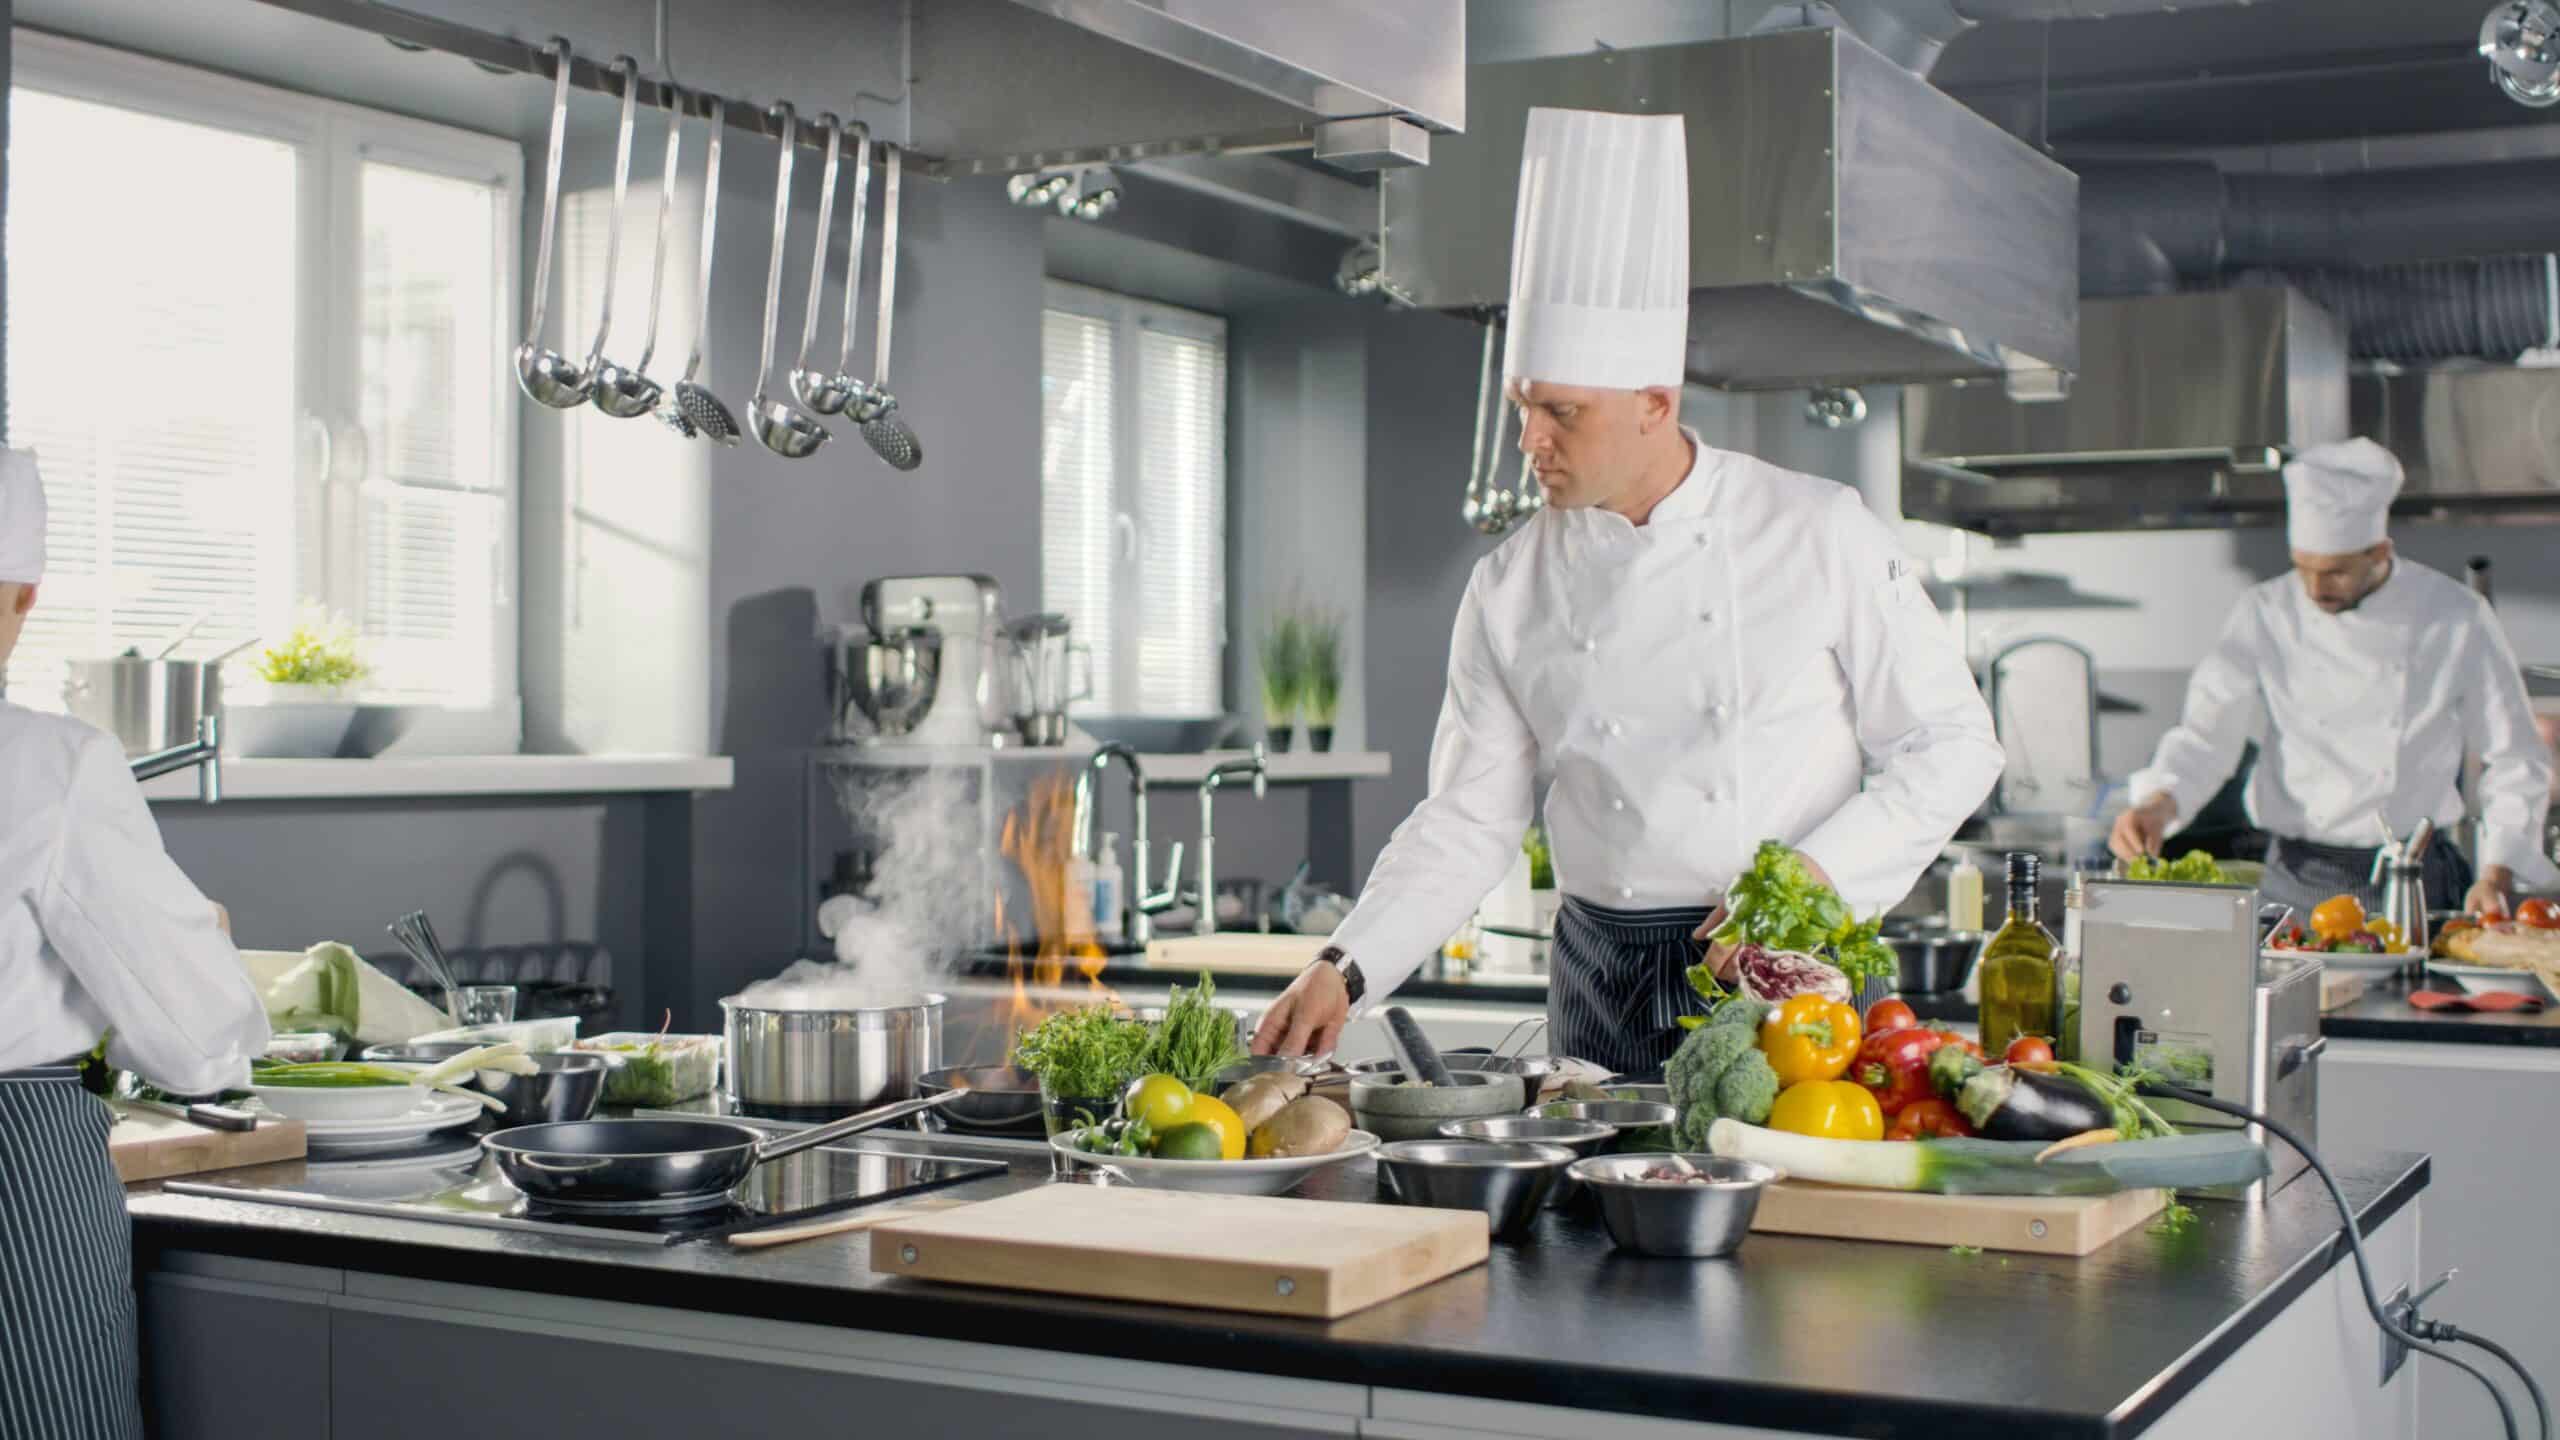 Extend the life of cooking oil with Automated Cooking Oil Management - Restaurant Technologies